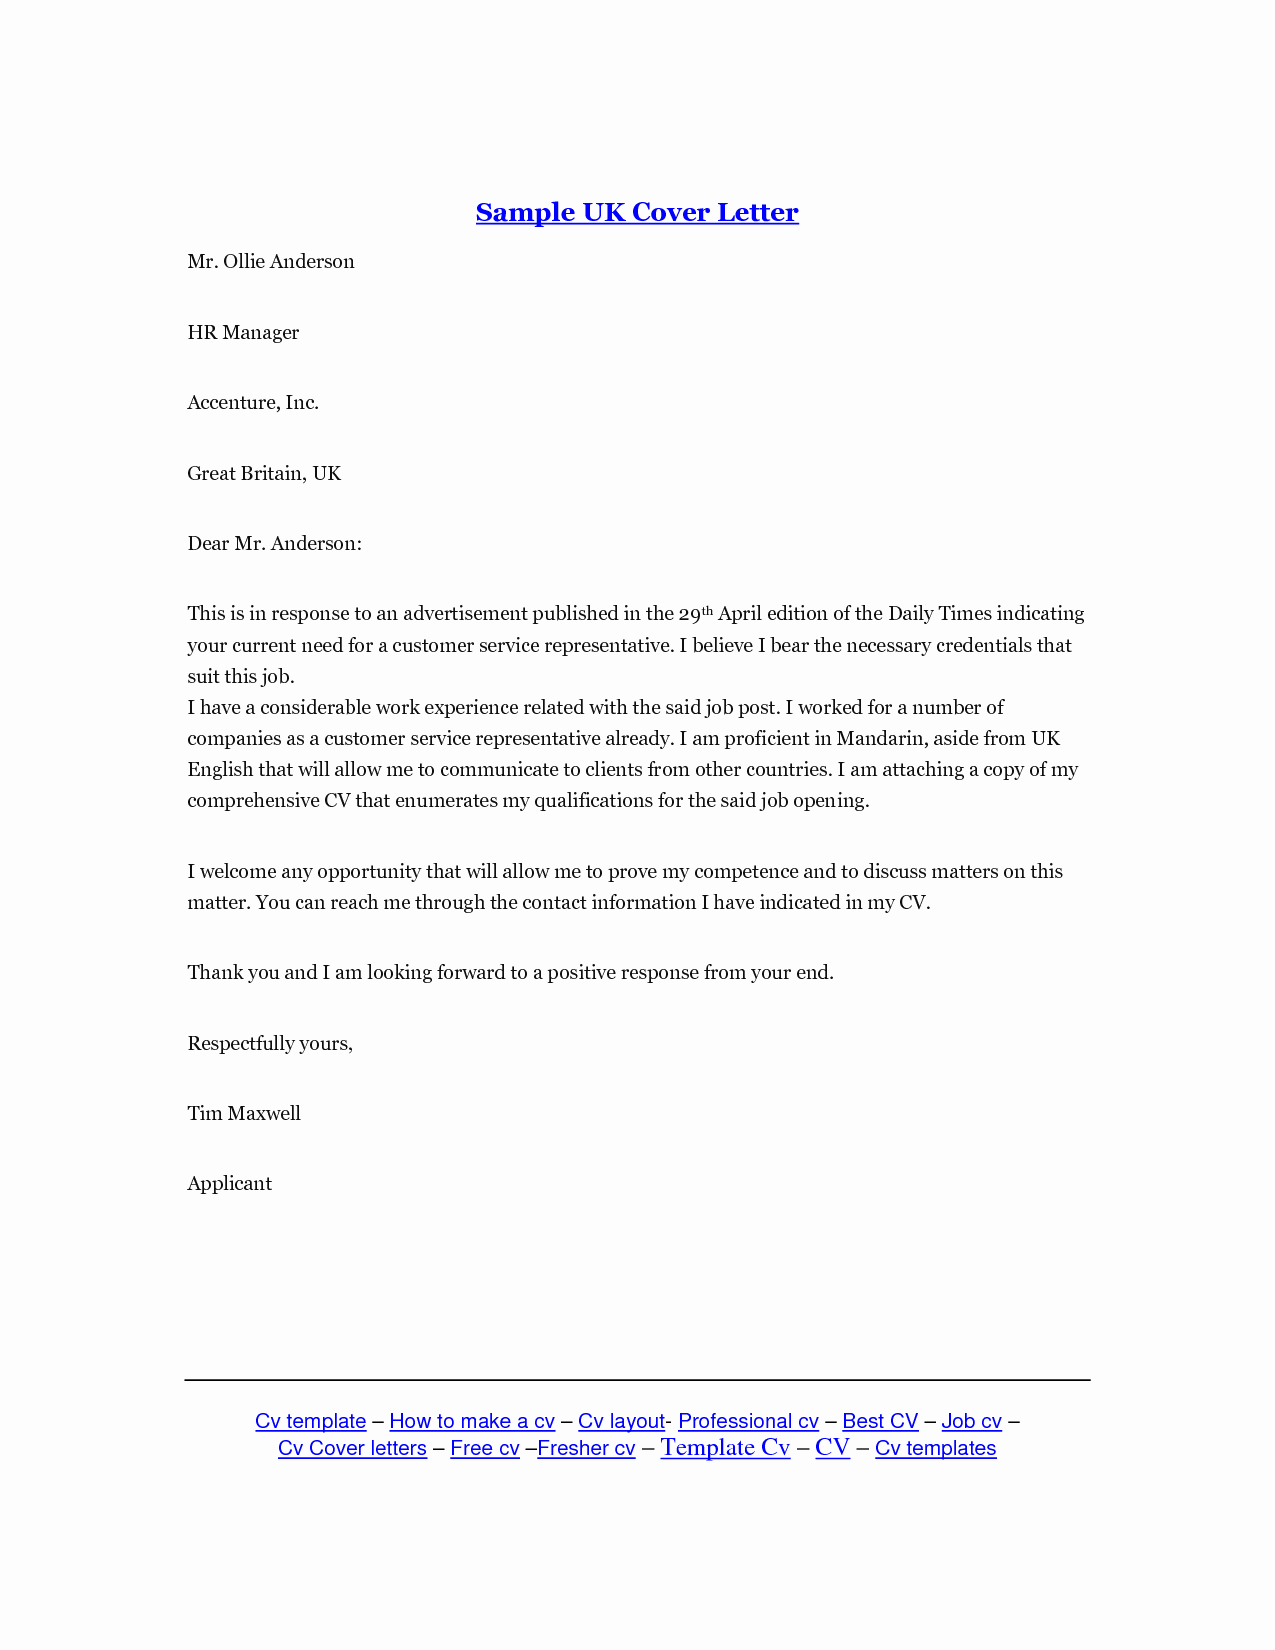 Free Templates for Cover Letters Unique Letter Template Uk